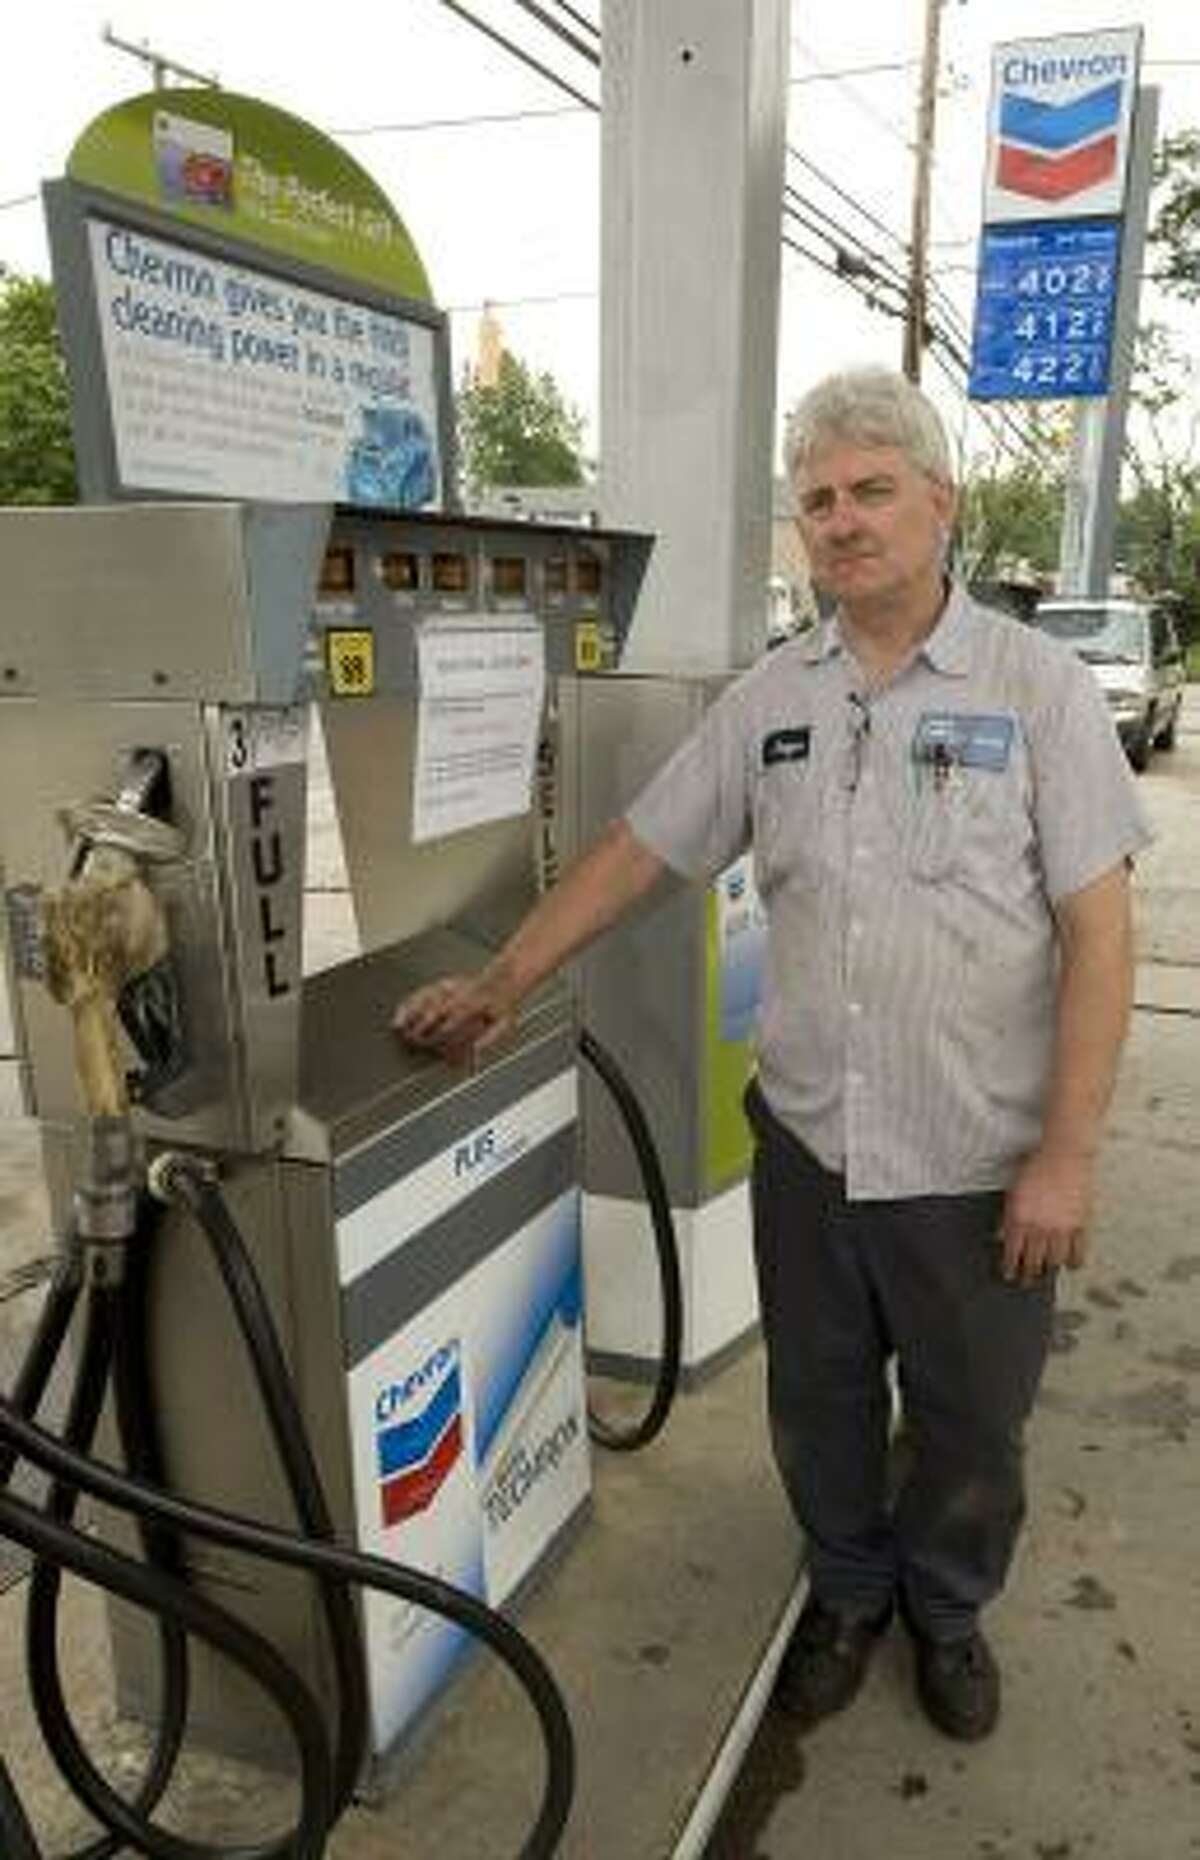 Roger Randolph has stopped accepting credit cards at his West Virginia Chevron station, saying he can't afford to continue paying the fees.